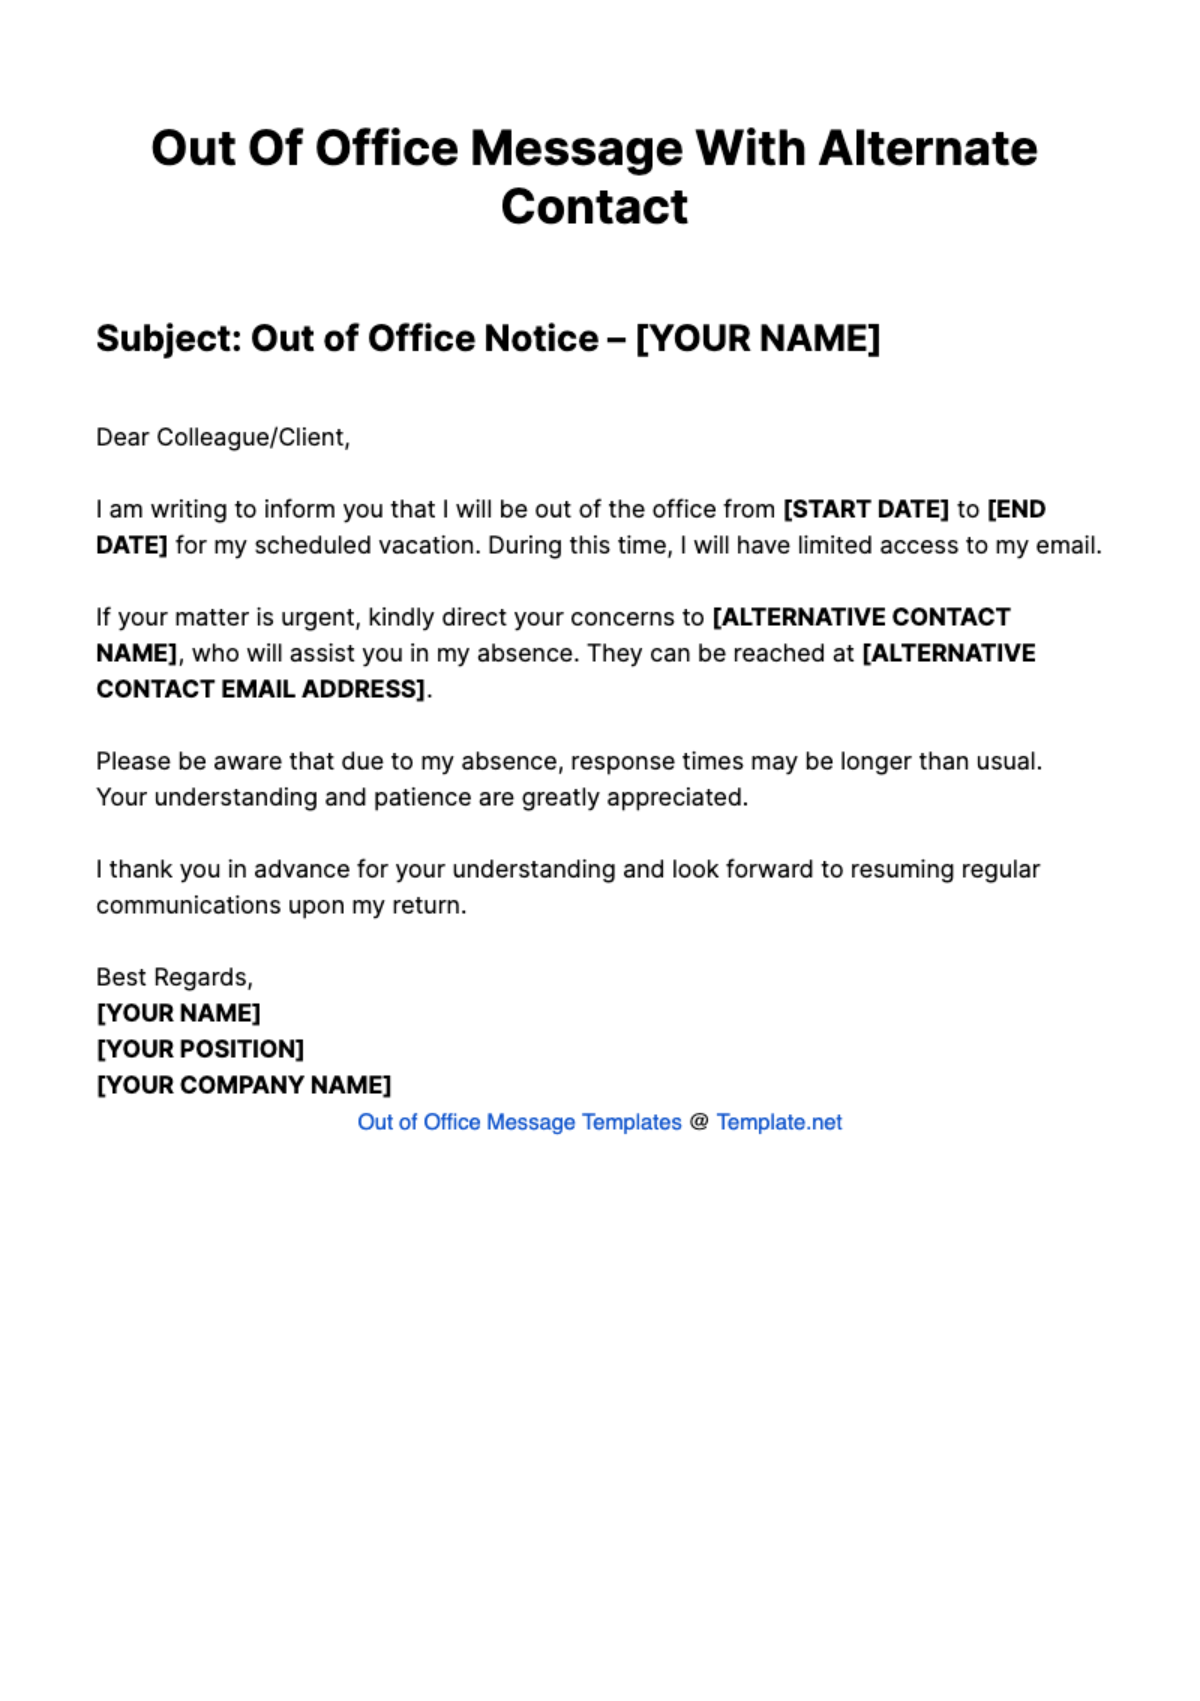 Out Of Office Message With Alternate Contact Template